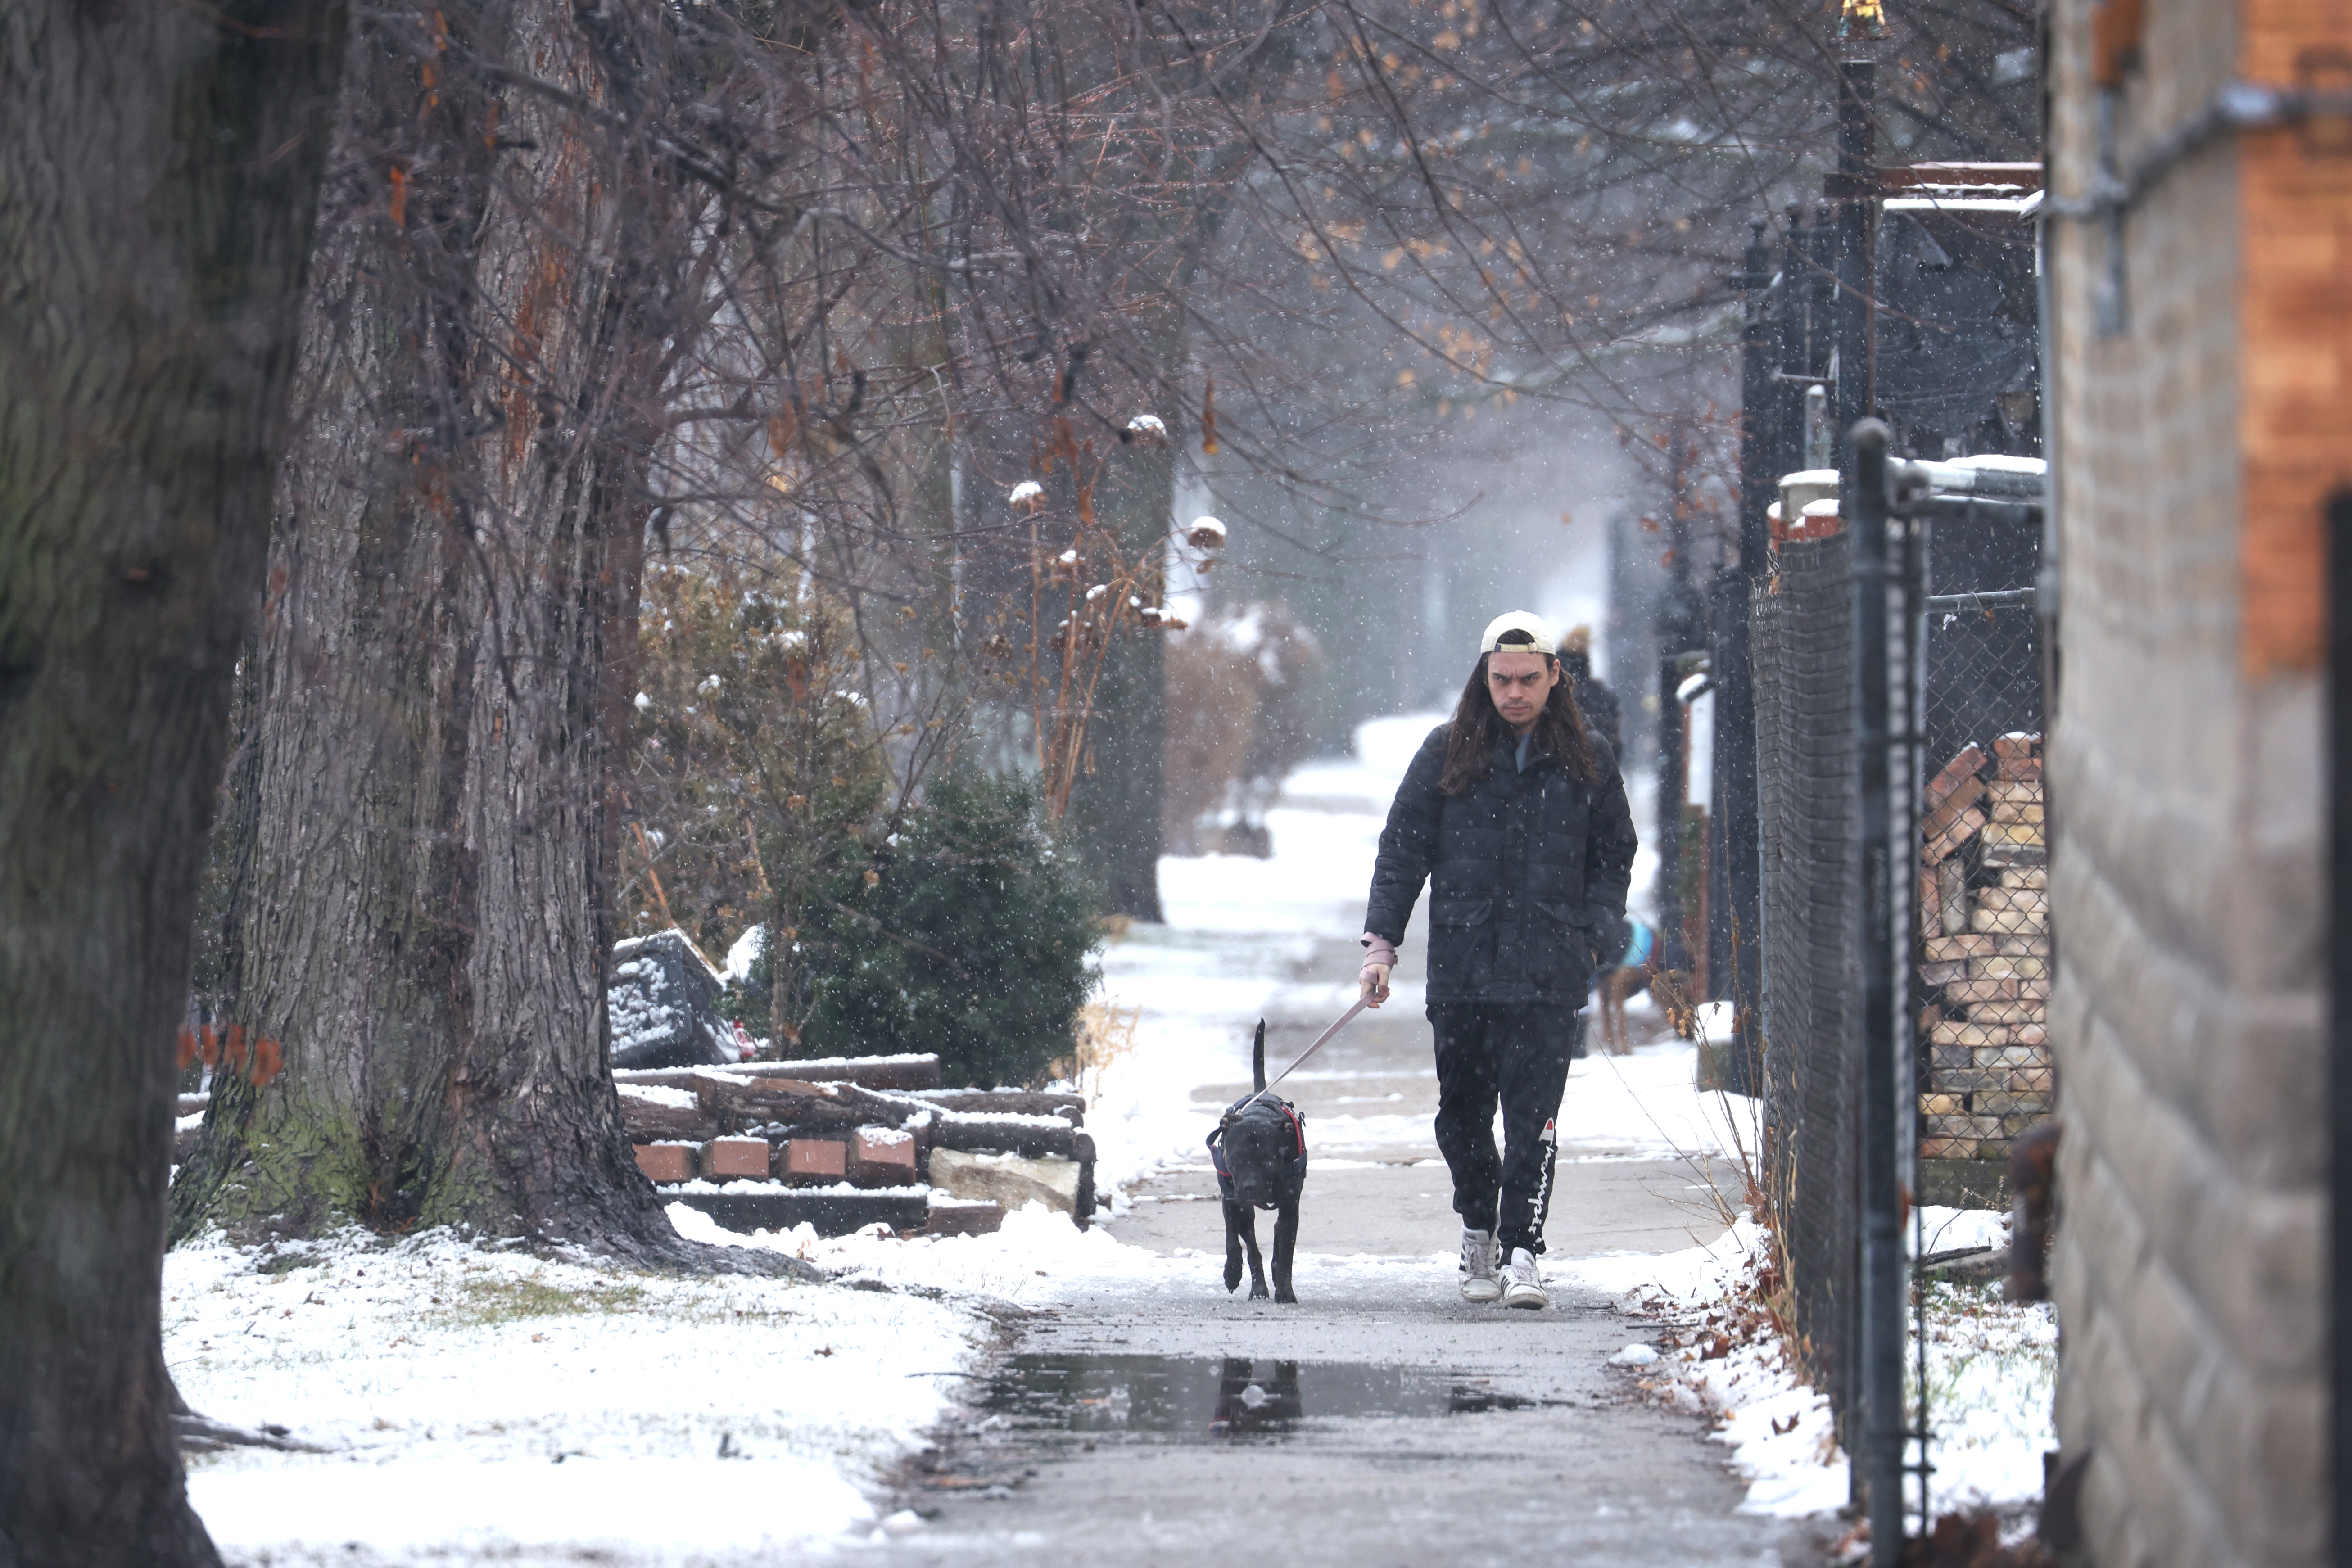 A man walks his dog in Humboldt Park, Chicago, Illinois on January 25, 2023. (Credit: Scott Olson/Getty Images)